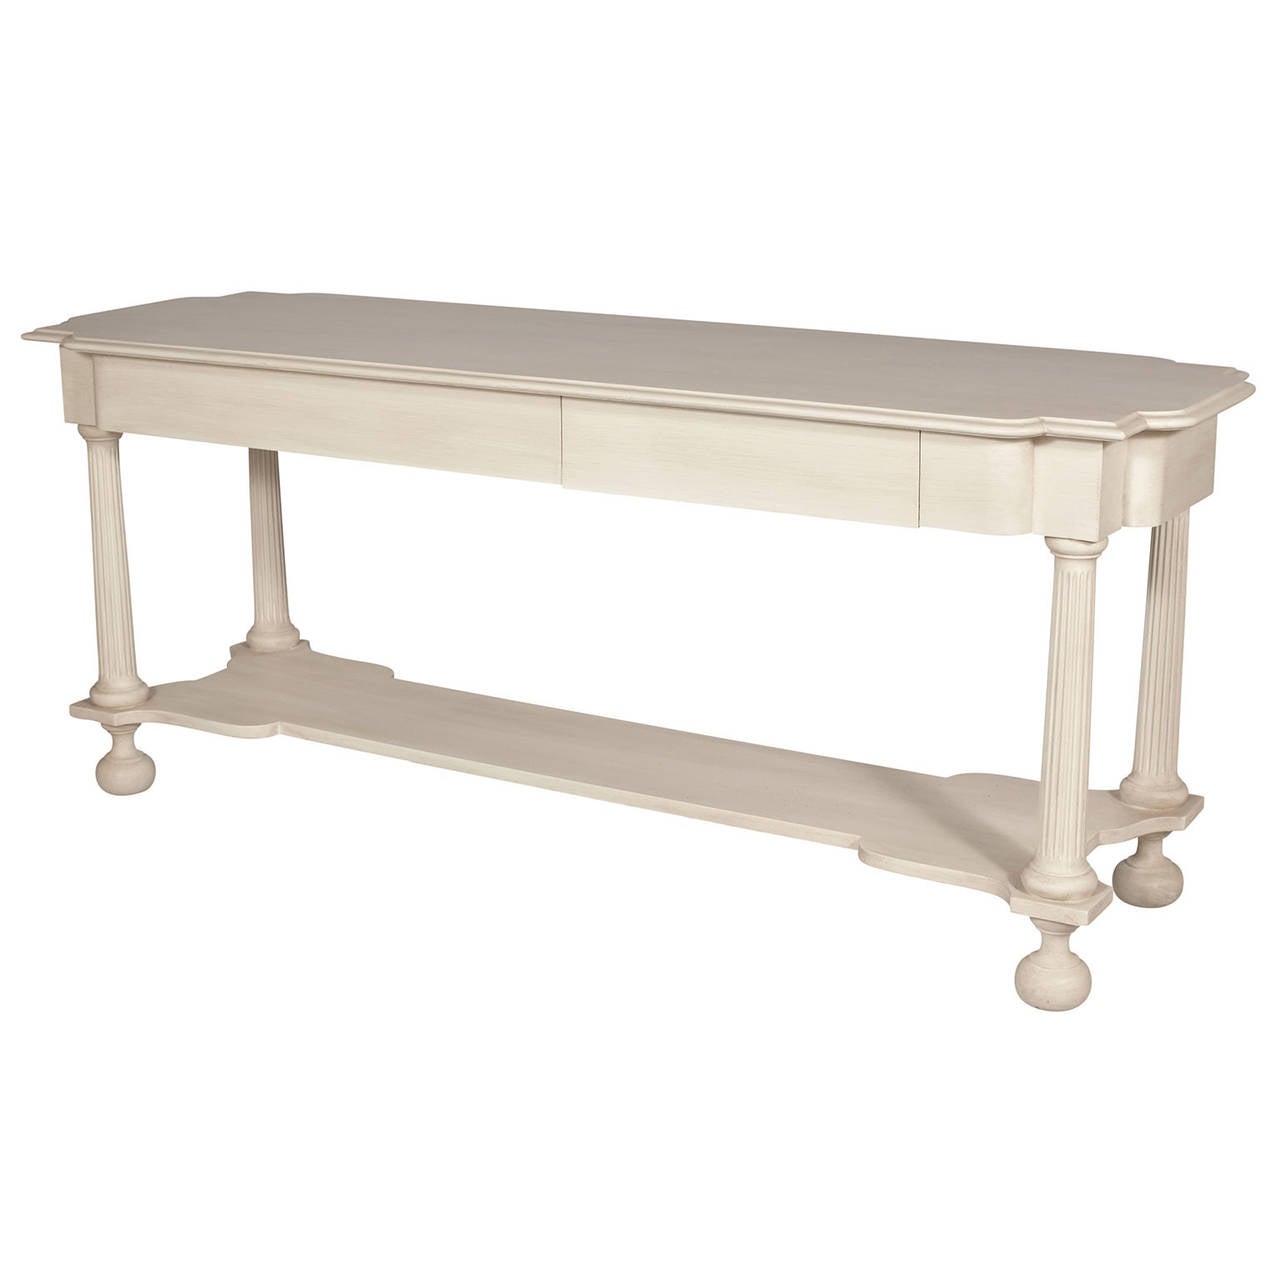 White Sofa Table with Lower Shelf In Excellent Condition For Sale In New York City, NY